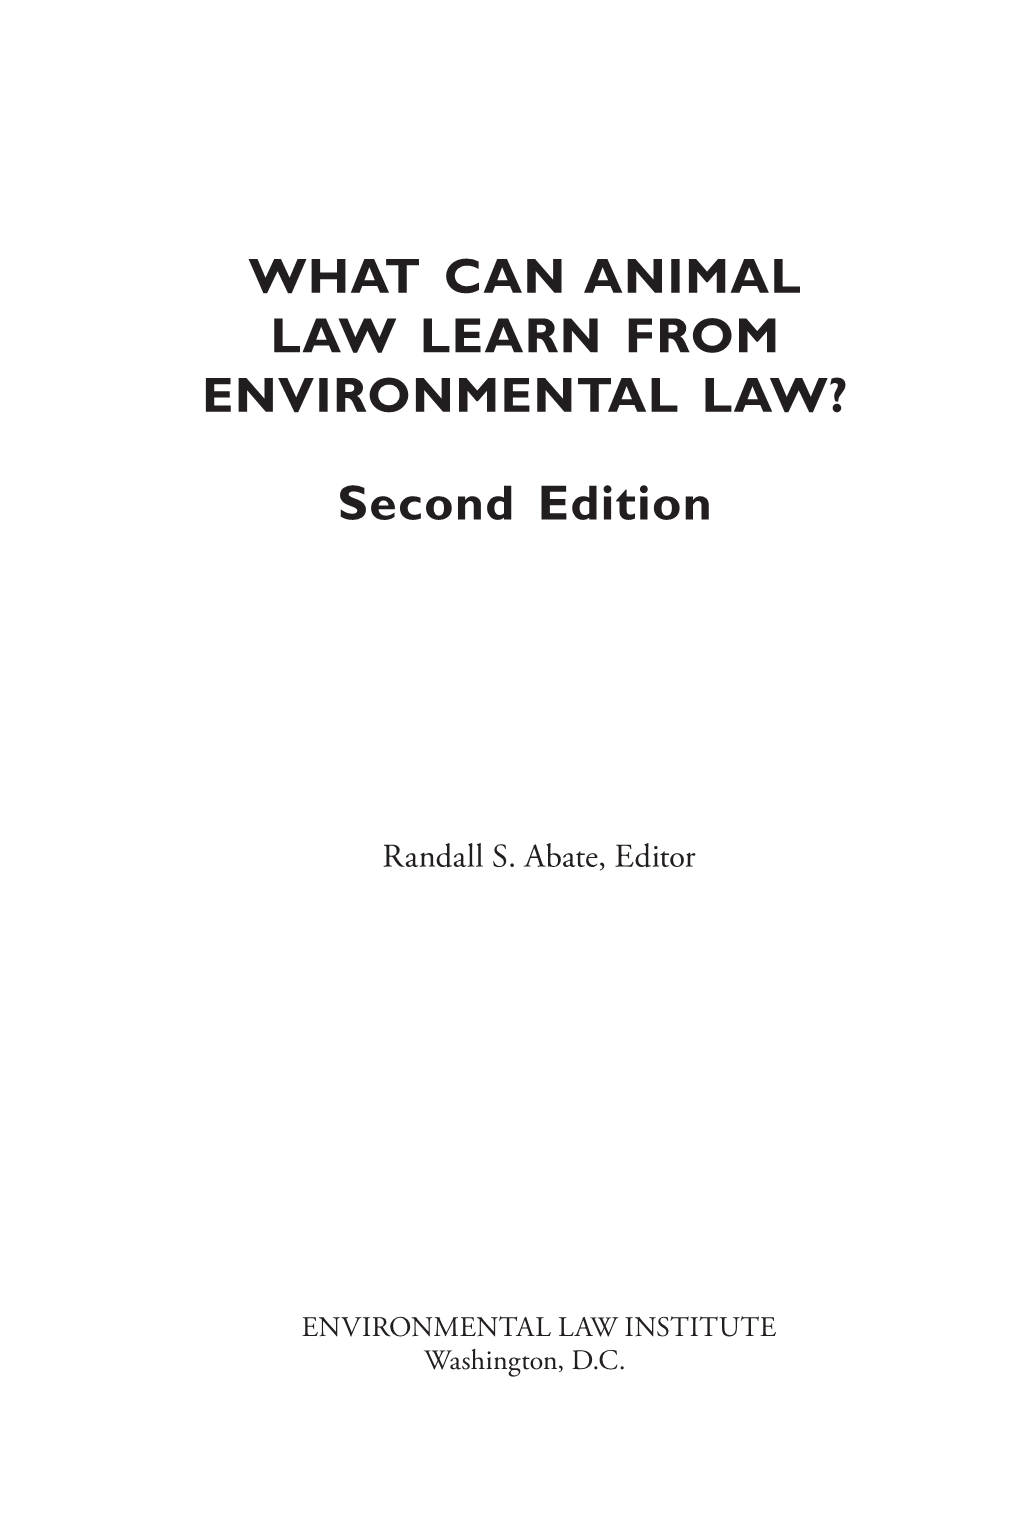 What Can Animal Law Learn from Environmental Law?